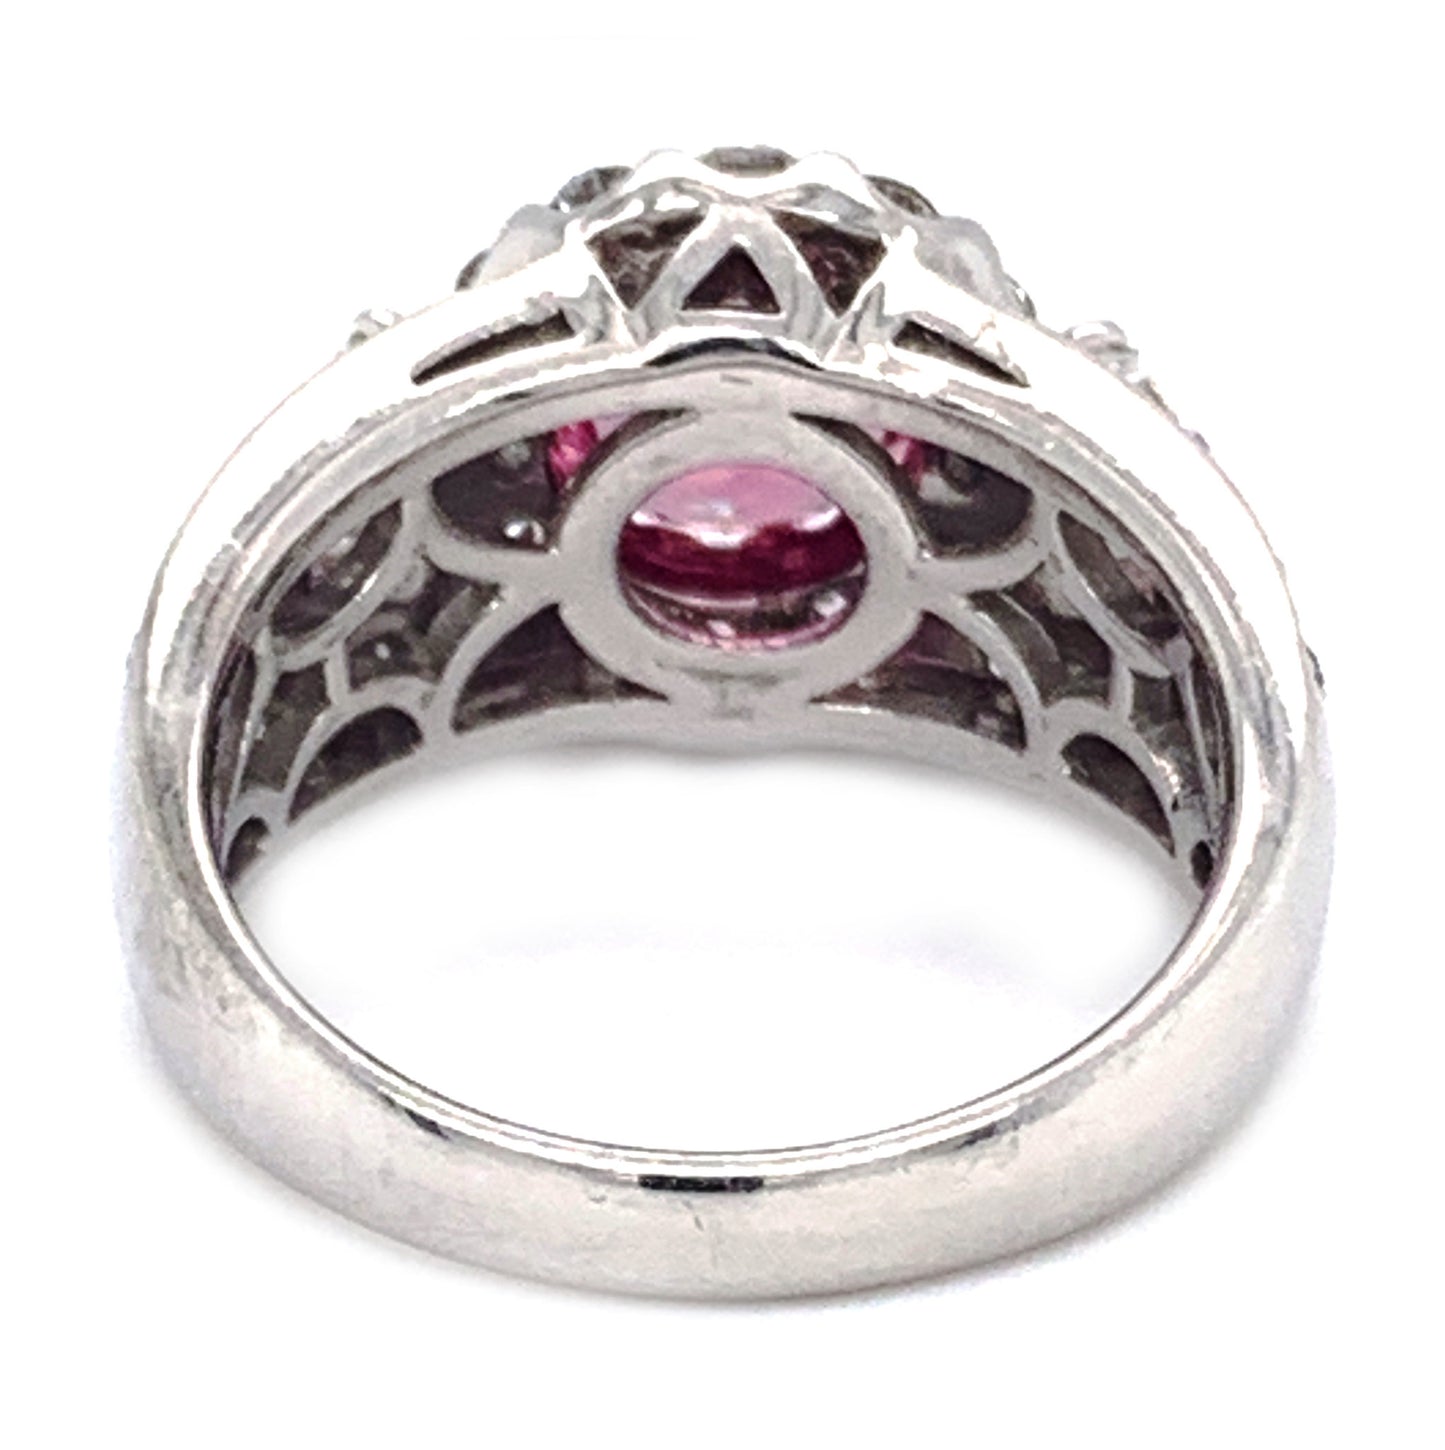 Platinum engagement ring with pink sapphire center and diamonds